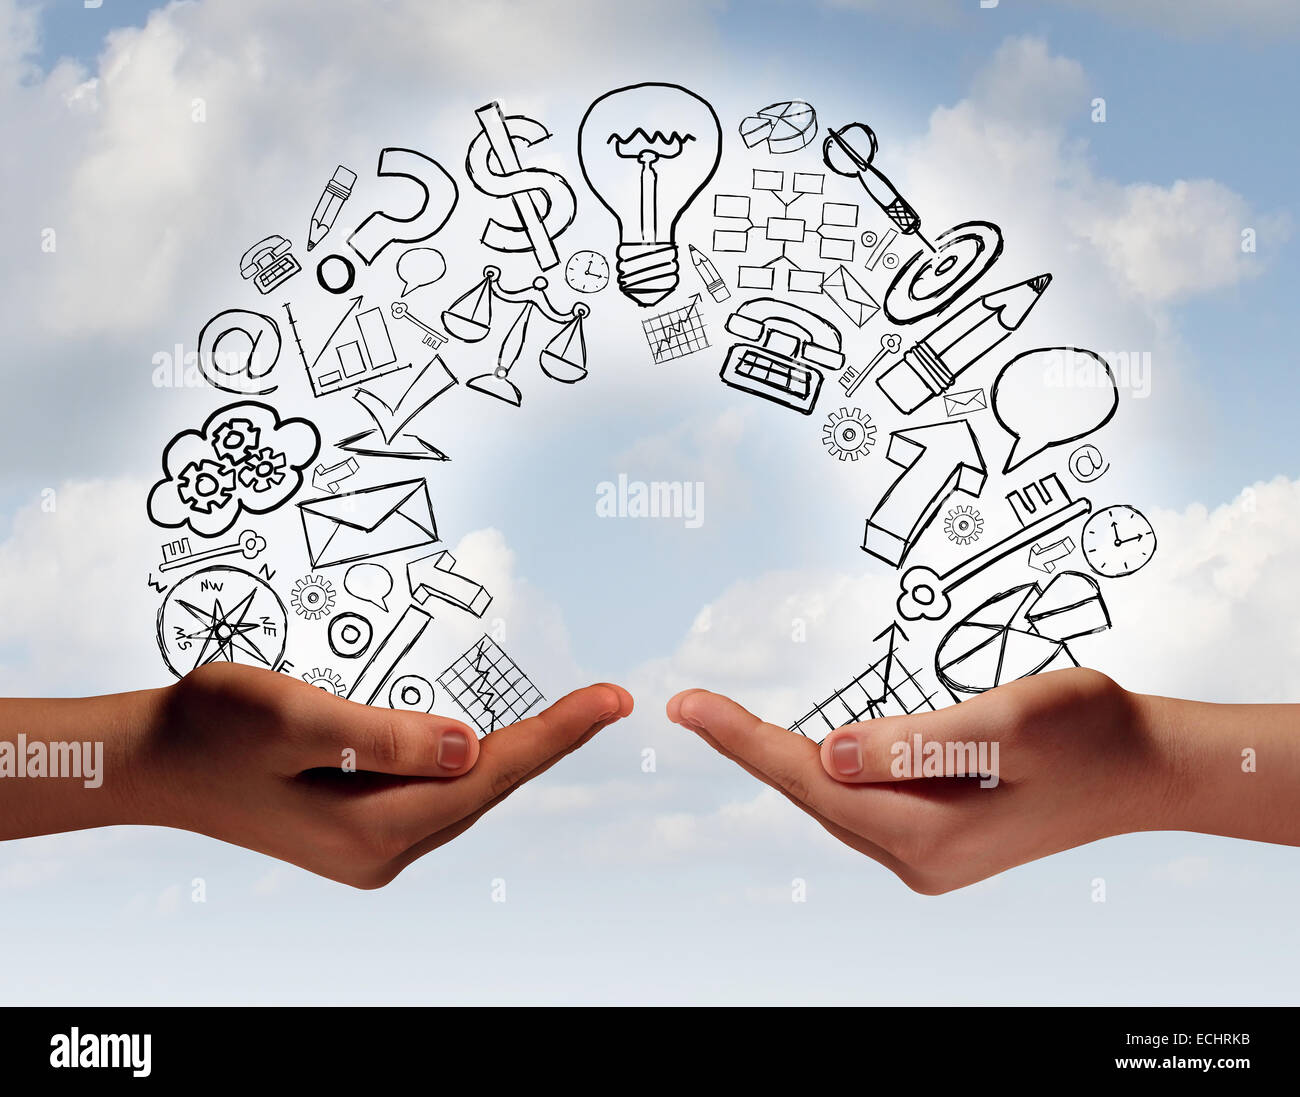 Business exchange concept as two human hands from diverse cultural backgrounds exchanging financial and economic information and training as a metaphor for team success. Stock Photo